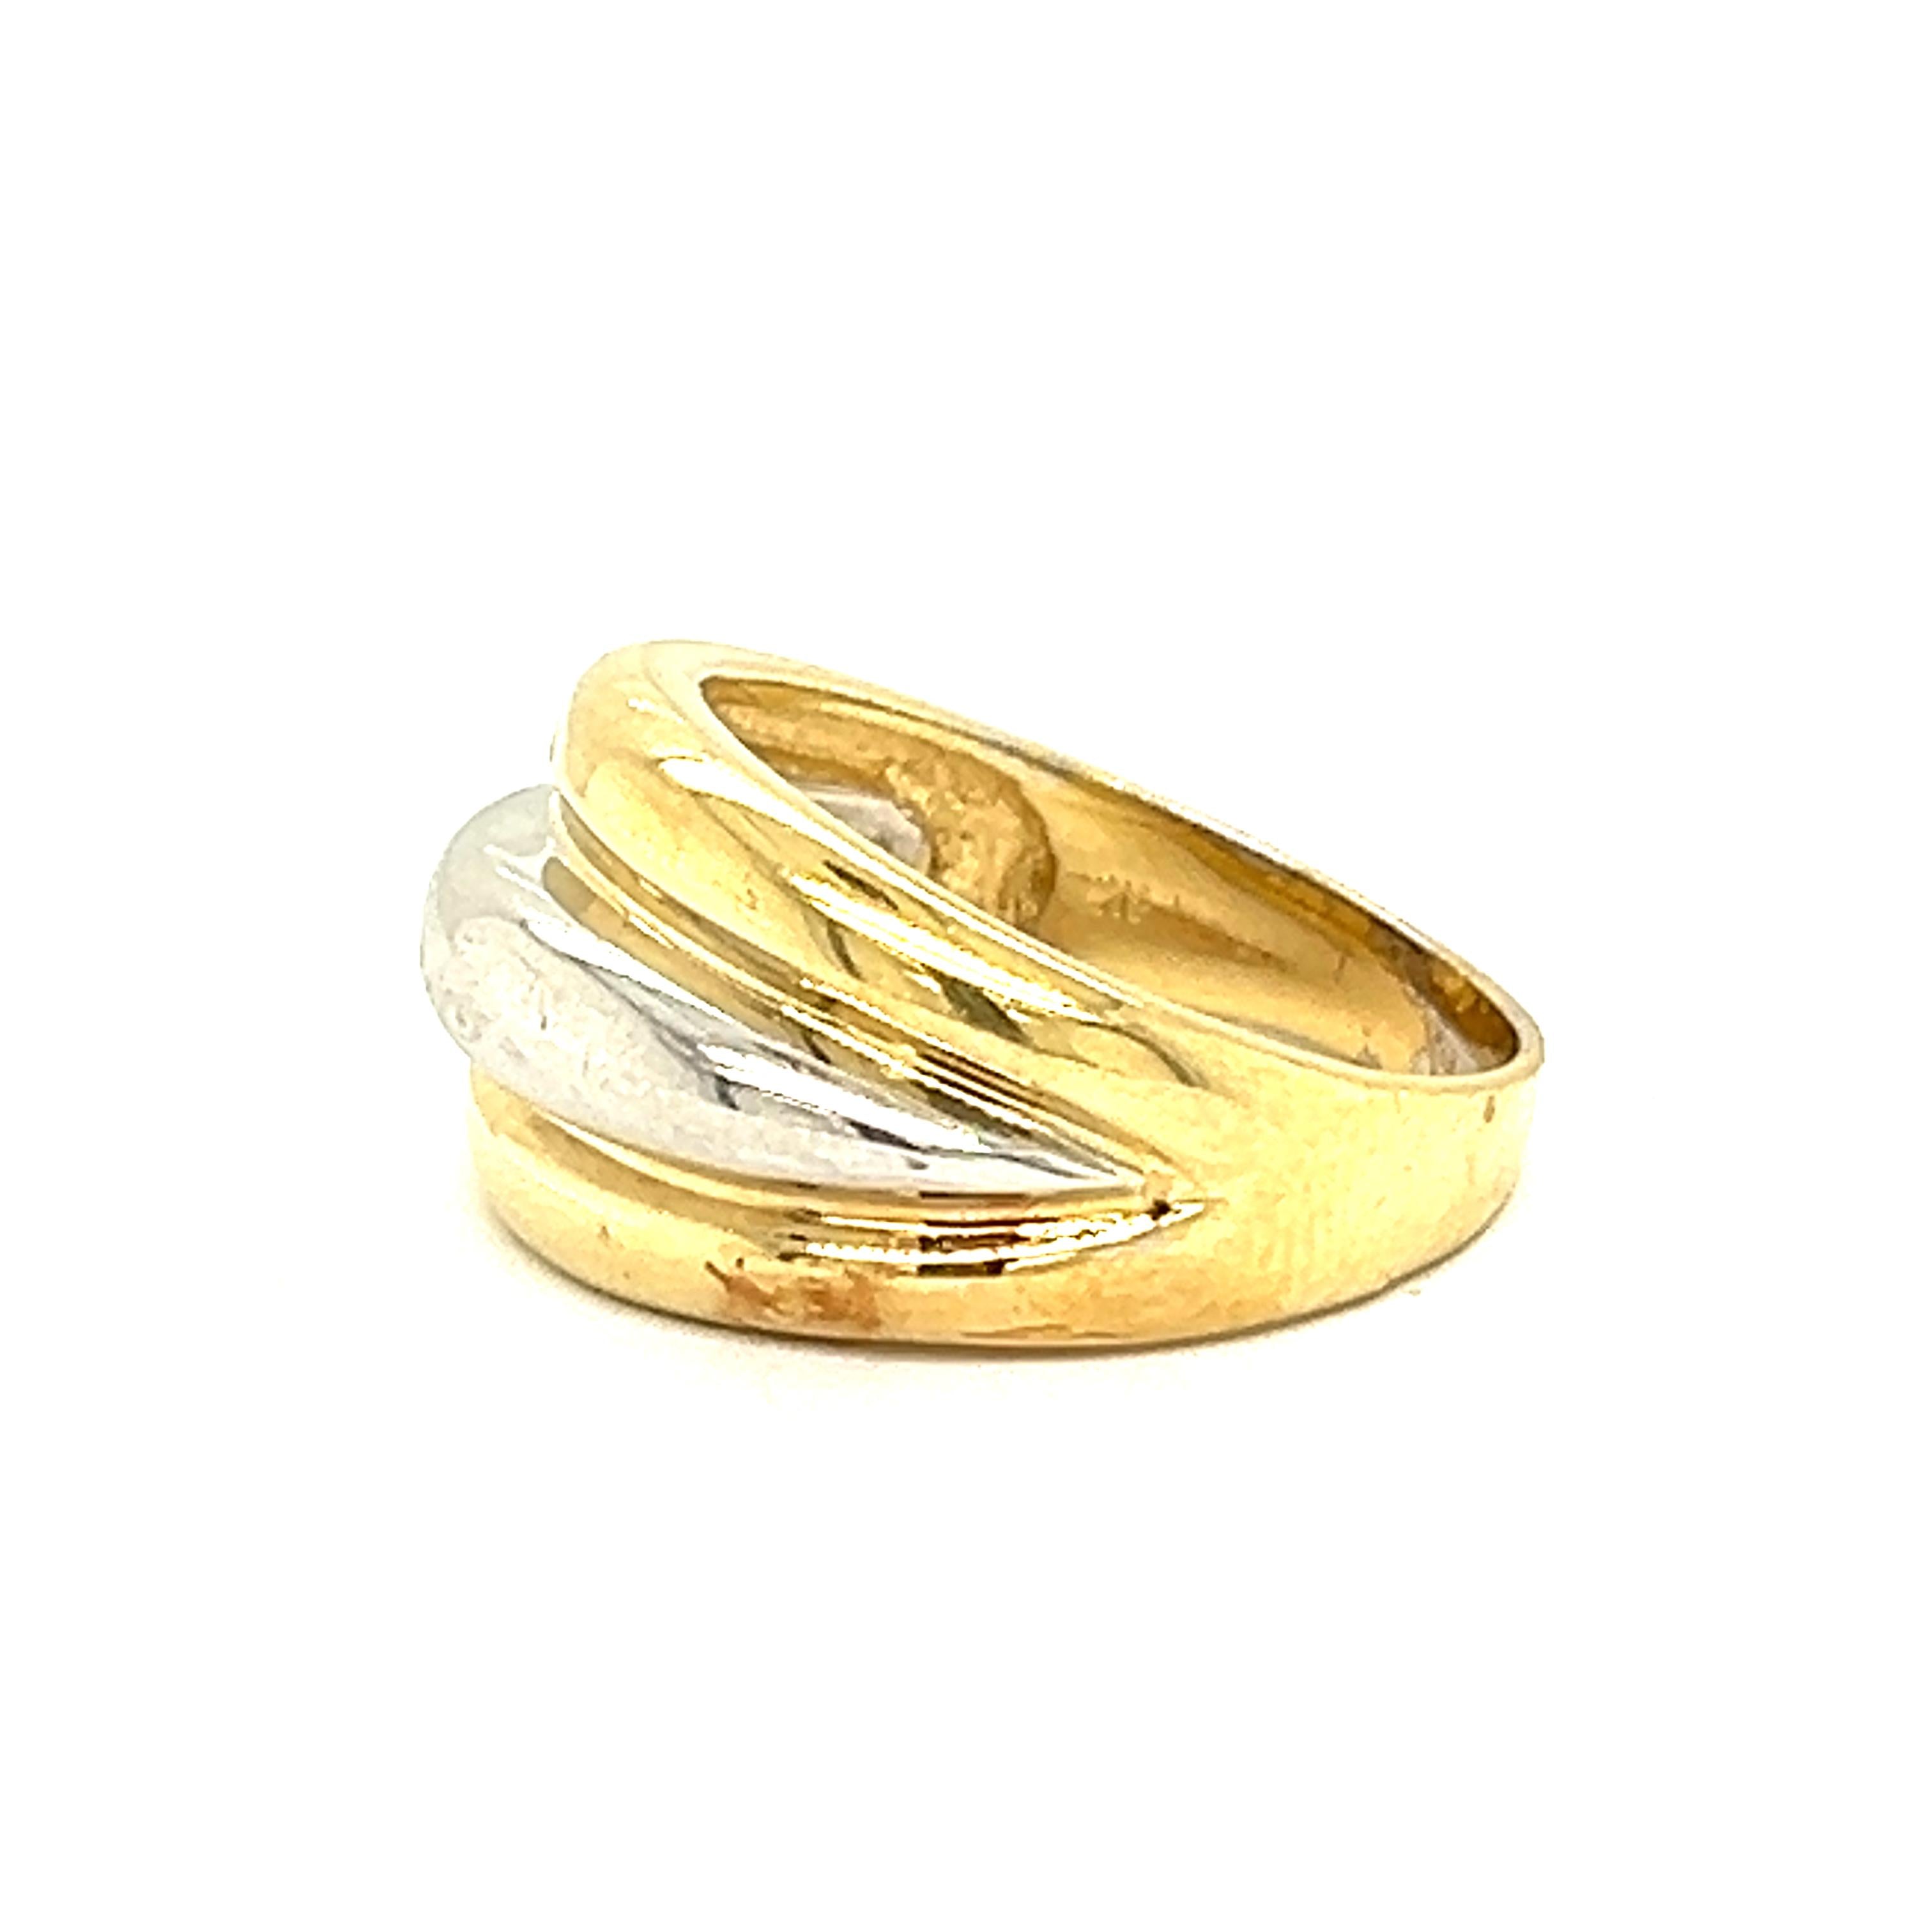 Vintage Two-Toned 14k White and Yellow Gold Ring